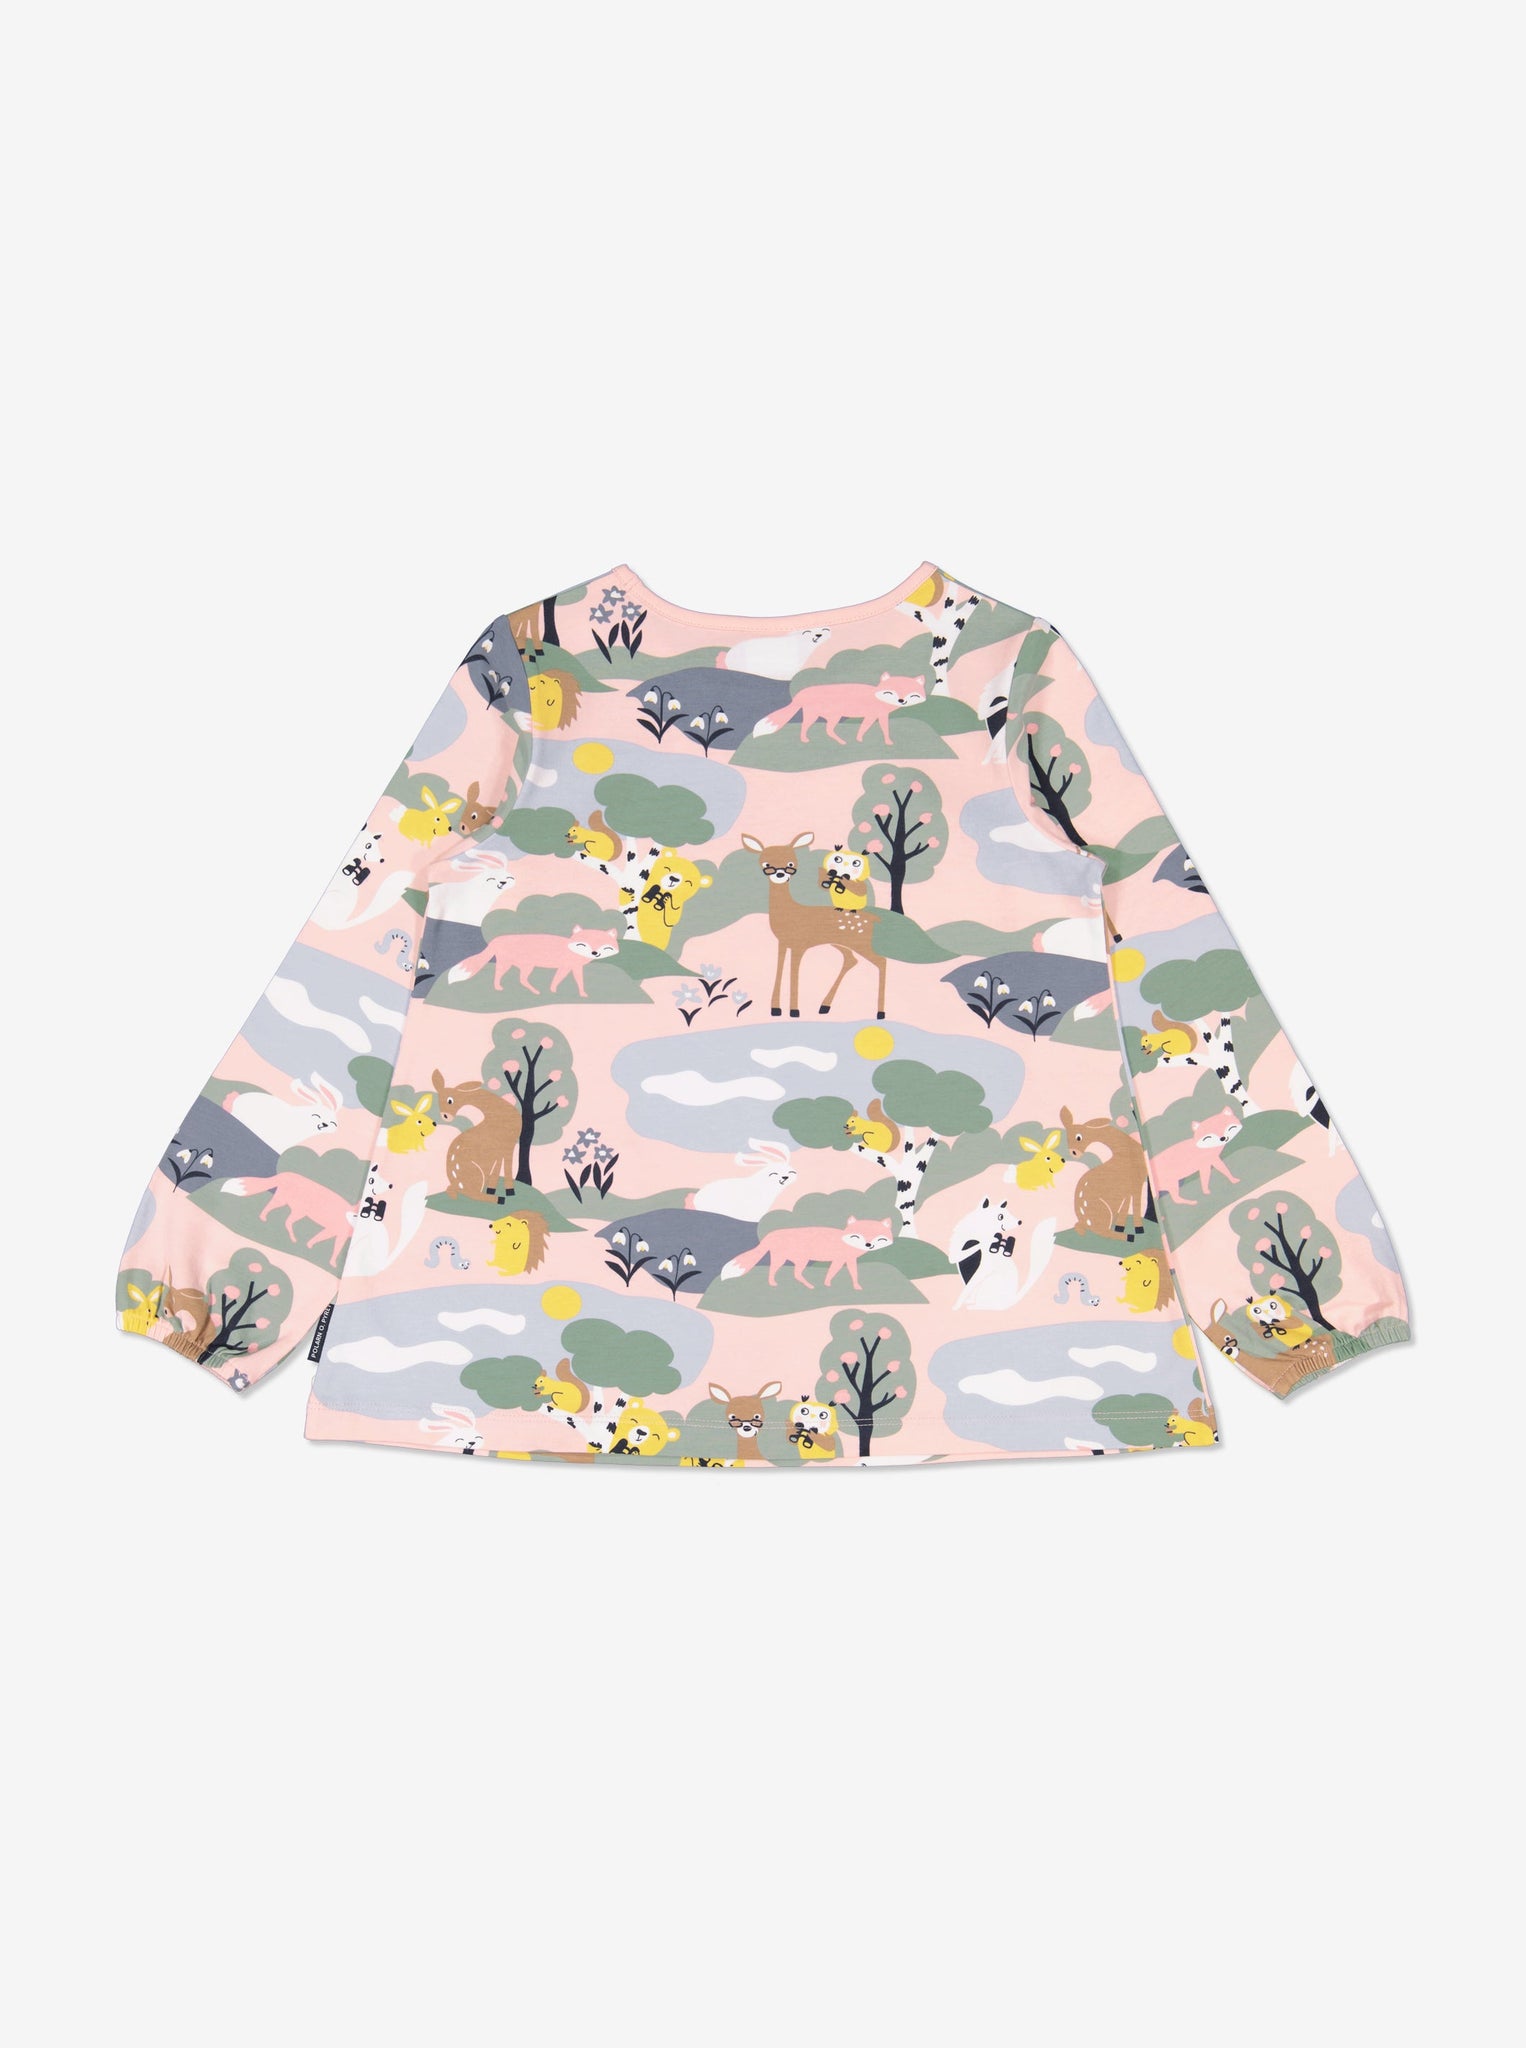  Nordic Animal Print Kids Top from Polarn O. Pyret Kidswear. Made using eco-friendly materials.